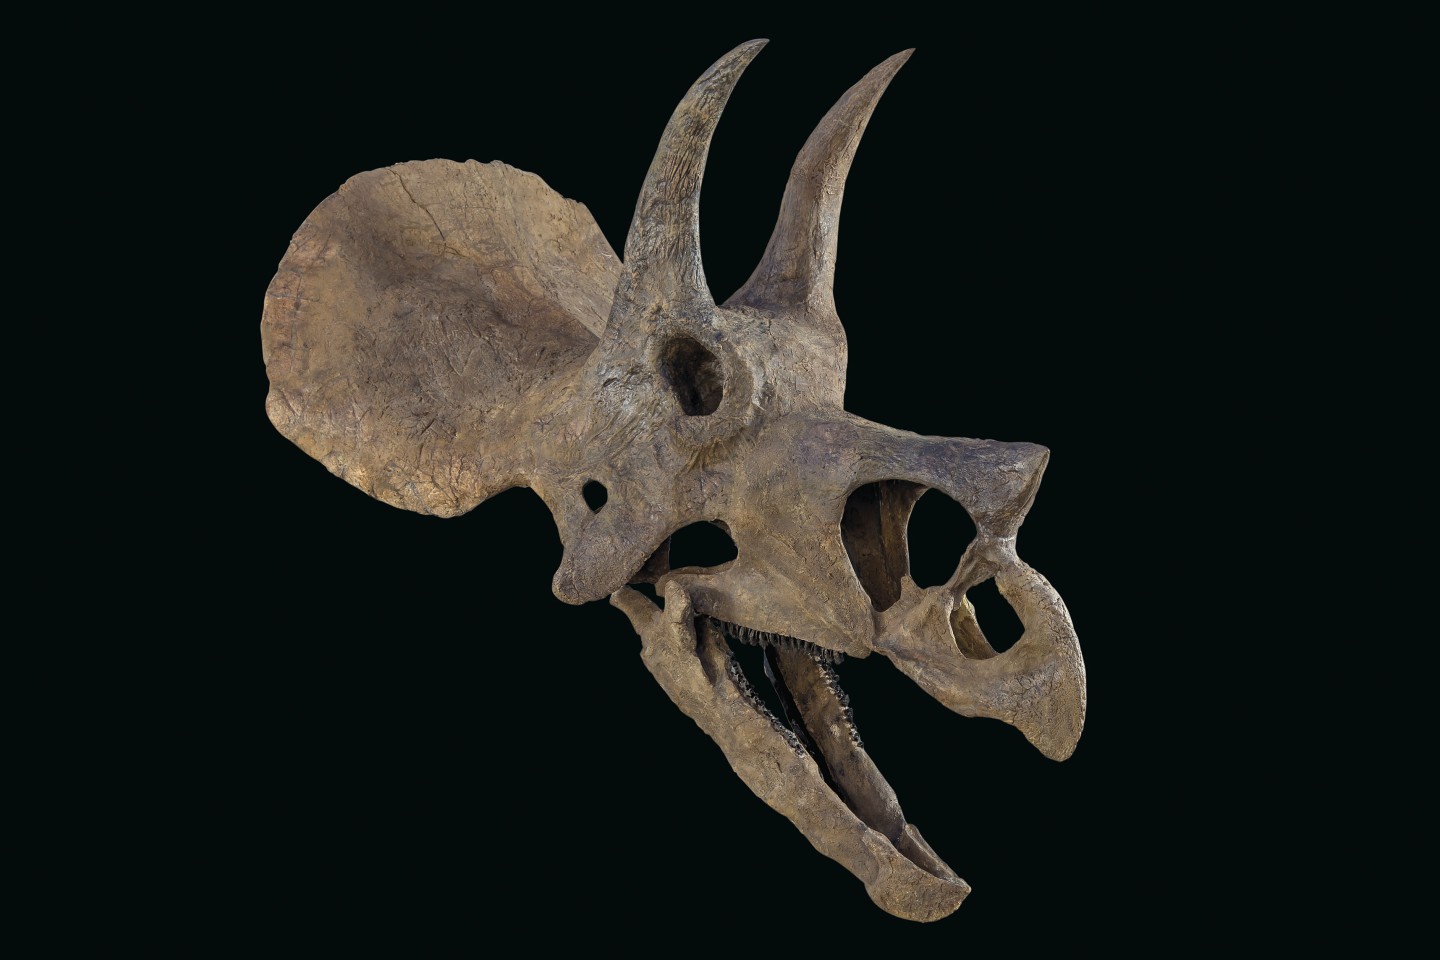 From the Maastrichtian late Cretaceous (68-65 million years ago) period, this Triceratops prorsus skull has 38-inch horns (measured to the brow) and is mounted on bespoke stand. It measures 87 x 52 x 87 inches (221 x 132 x 221 cm)